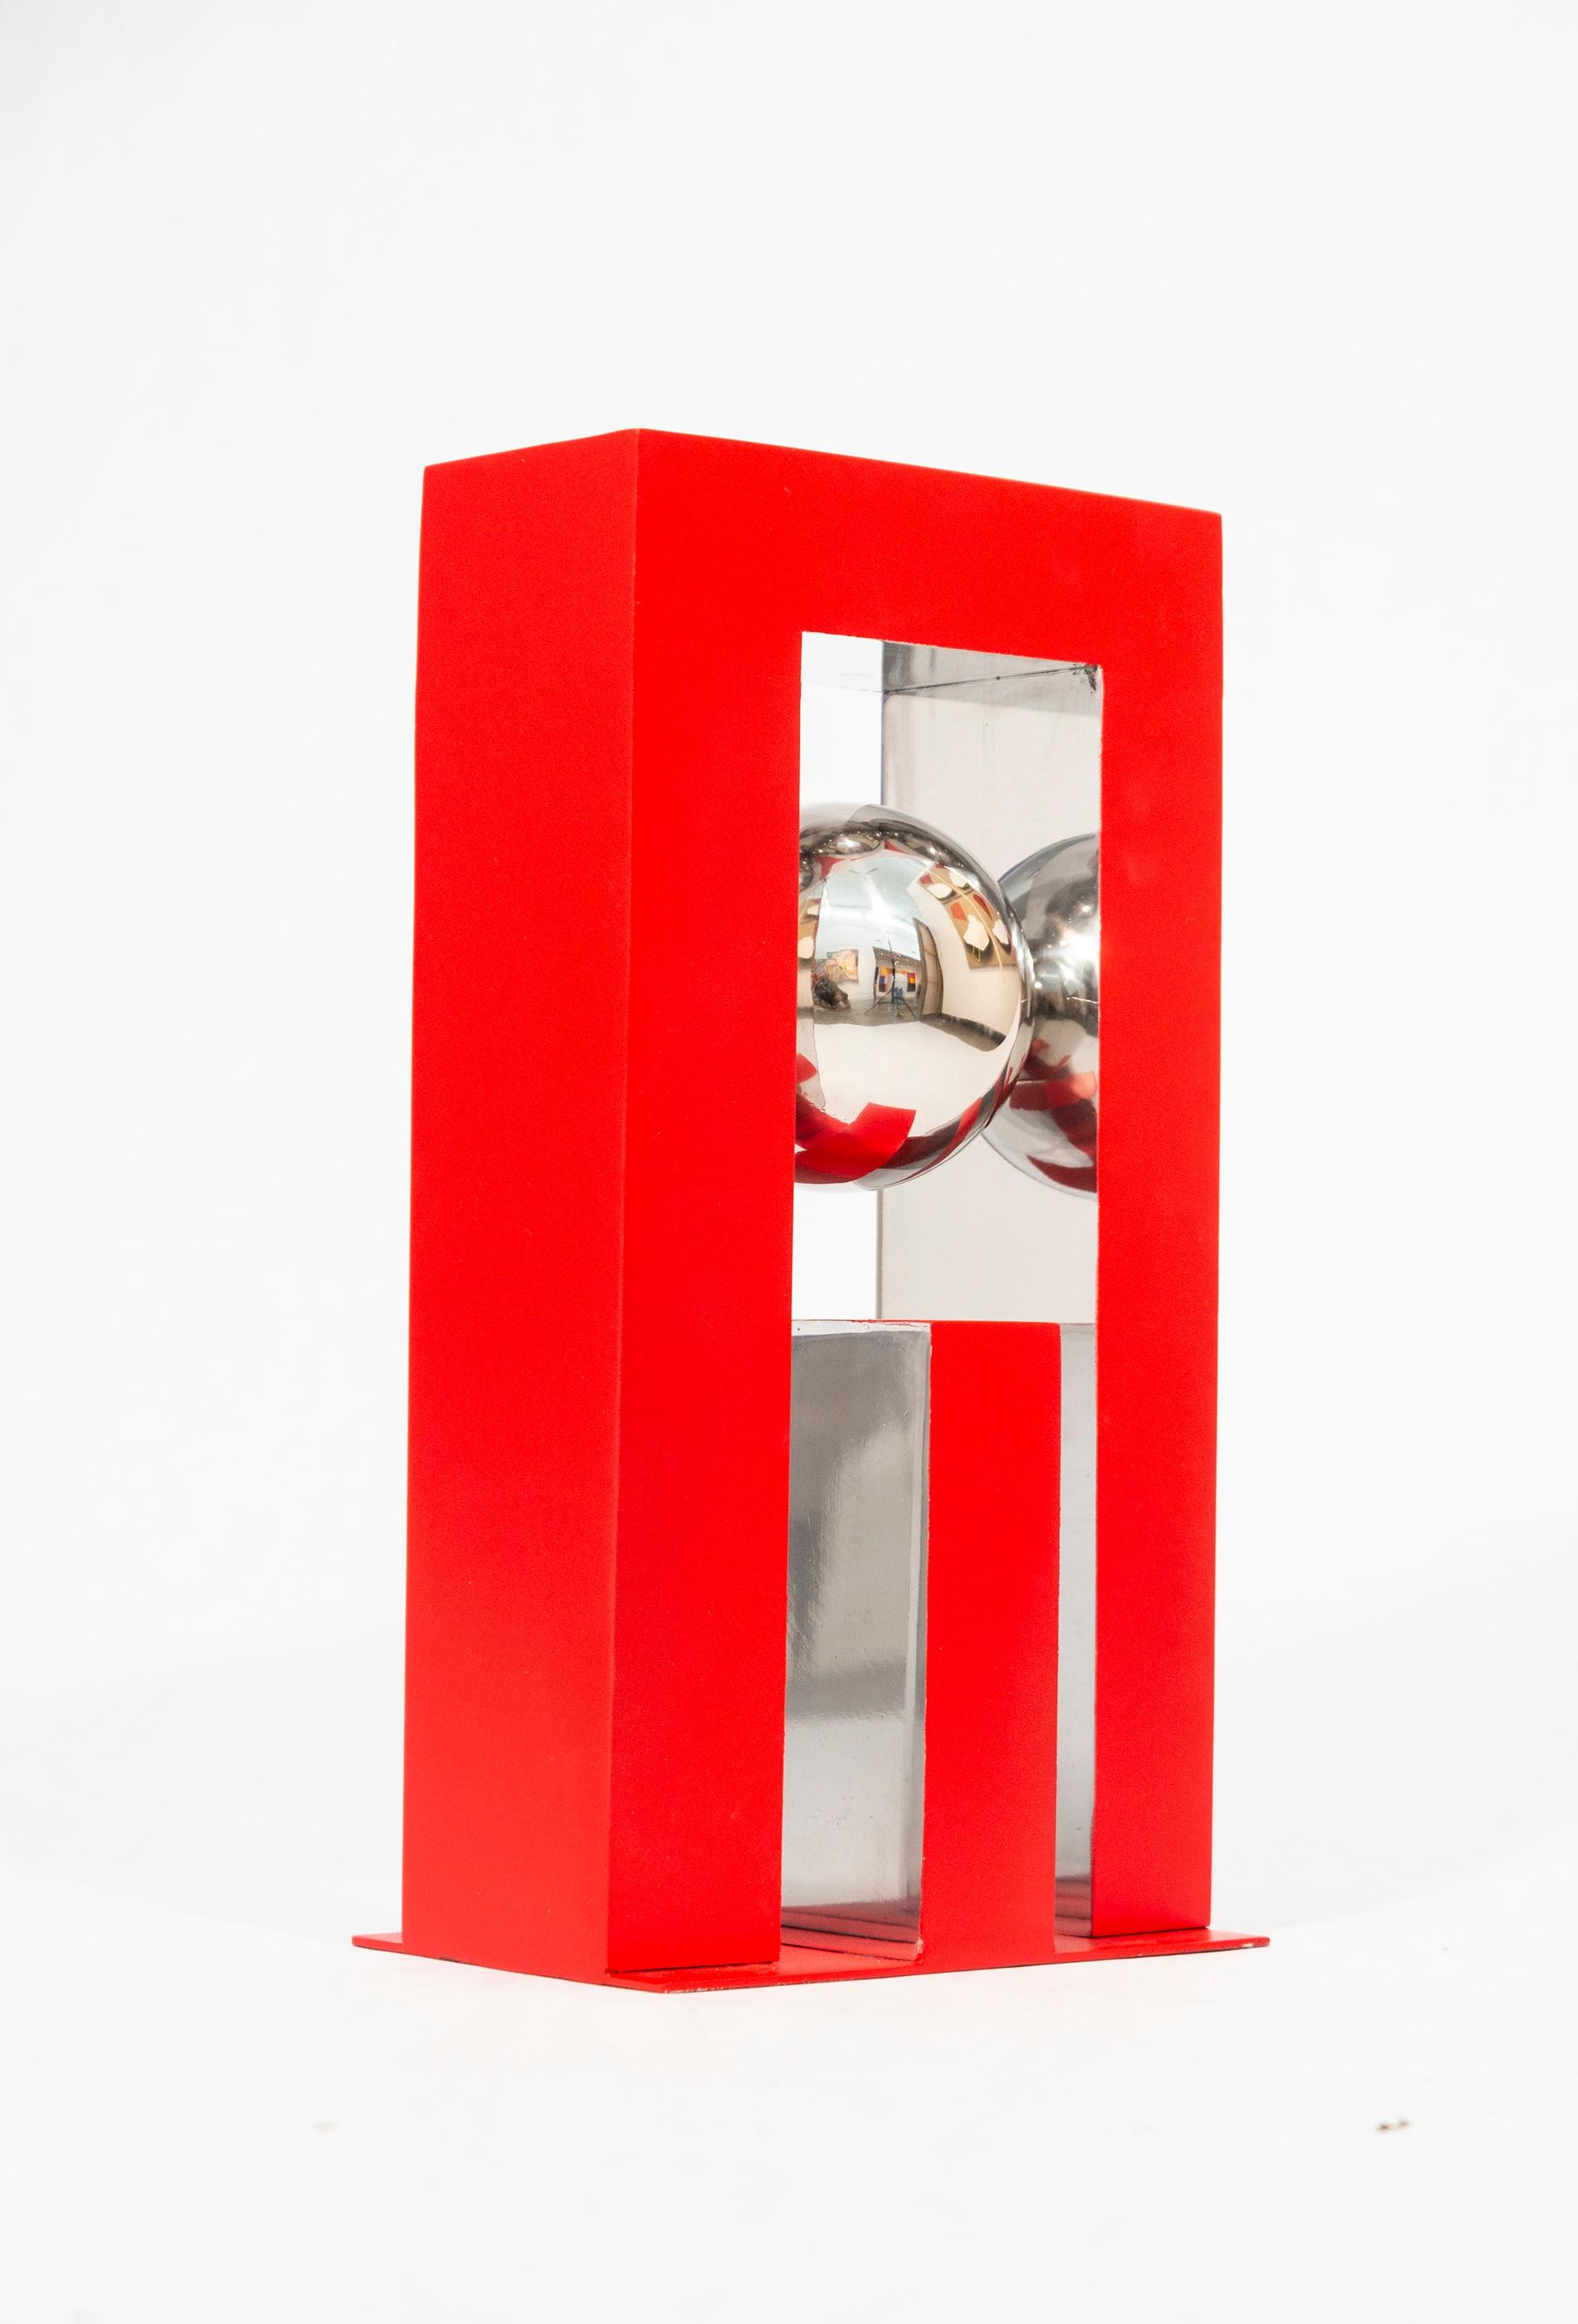 Celestial Mechanical - modern, geometric, abstract, painted aluminum sculpture - Sculpture by Philippe Pallafray